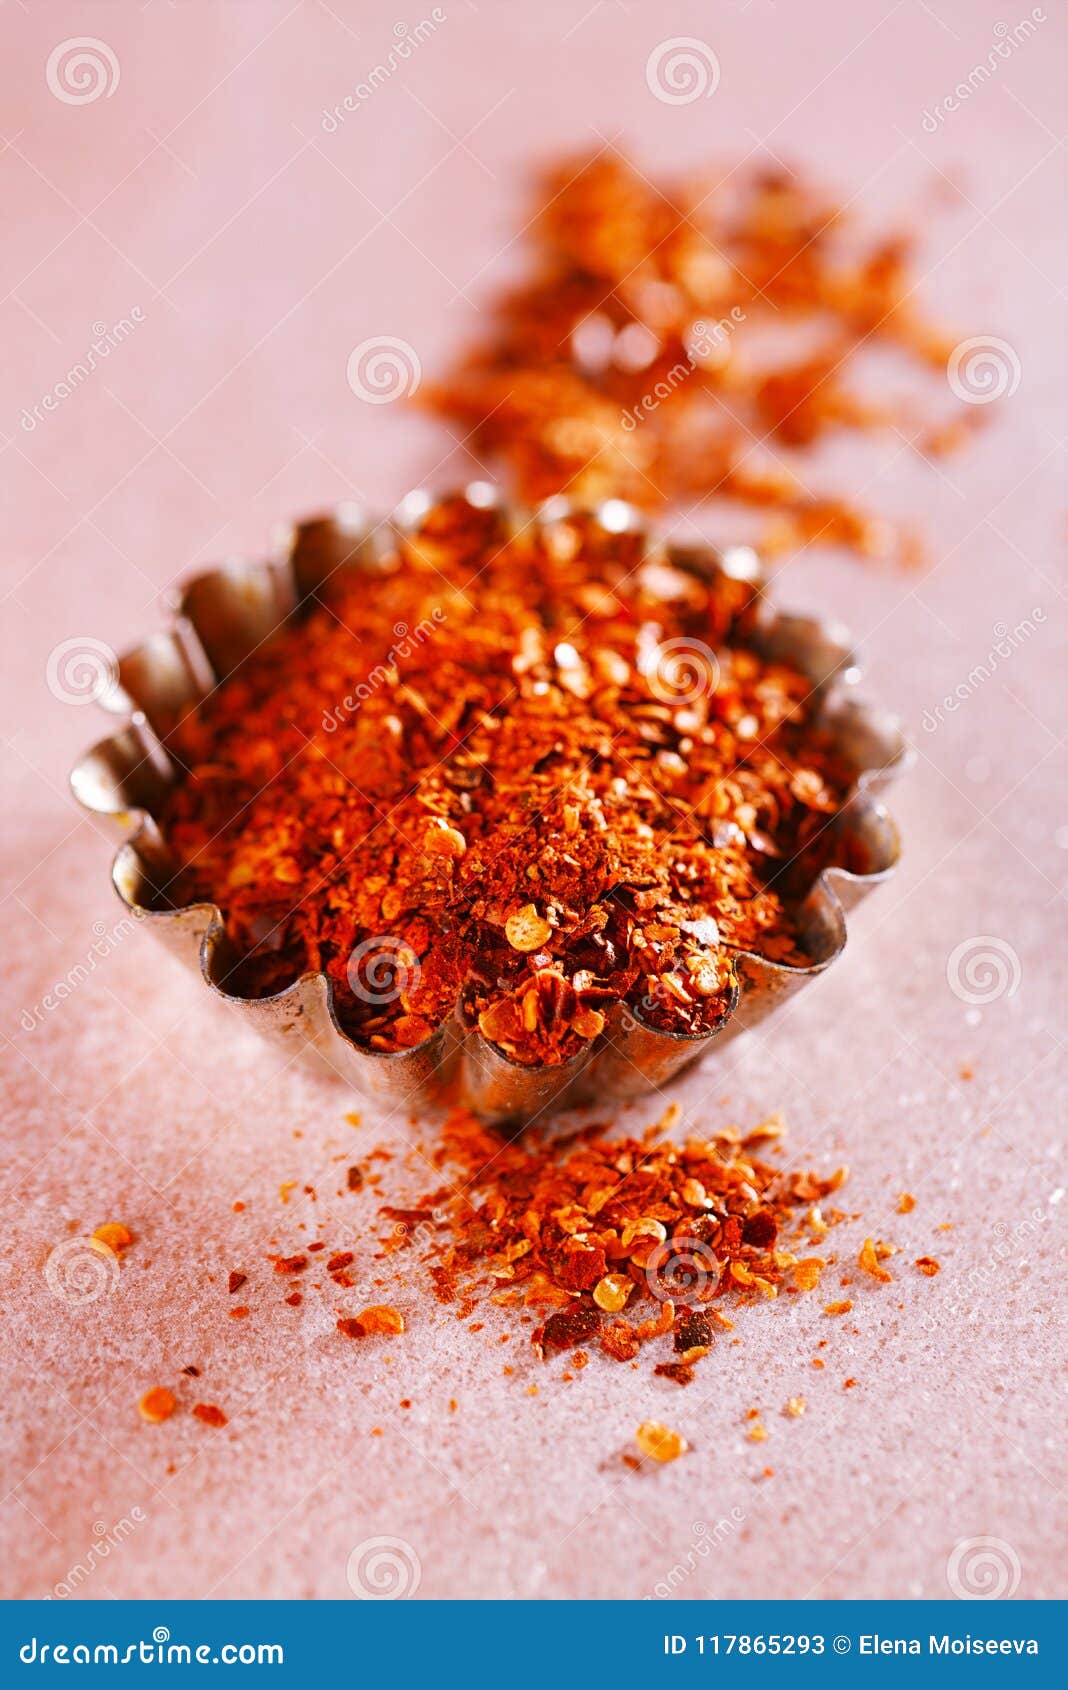 calabrian chilli pepper flakes or little devil